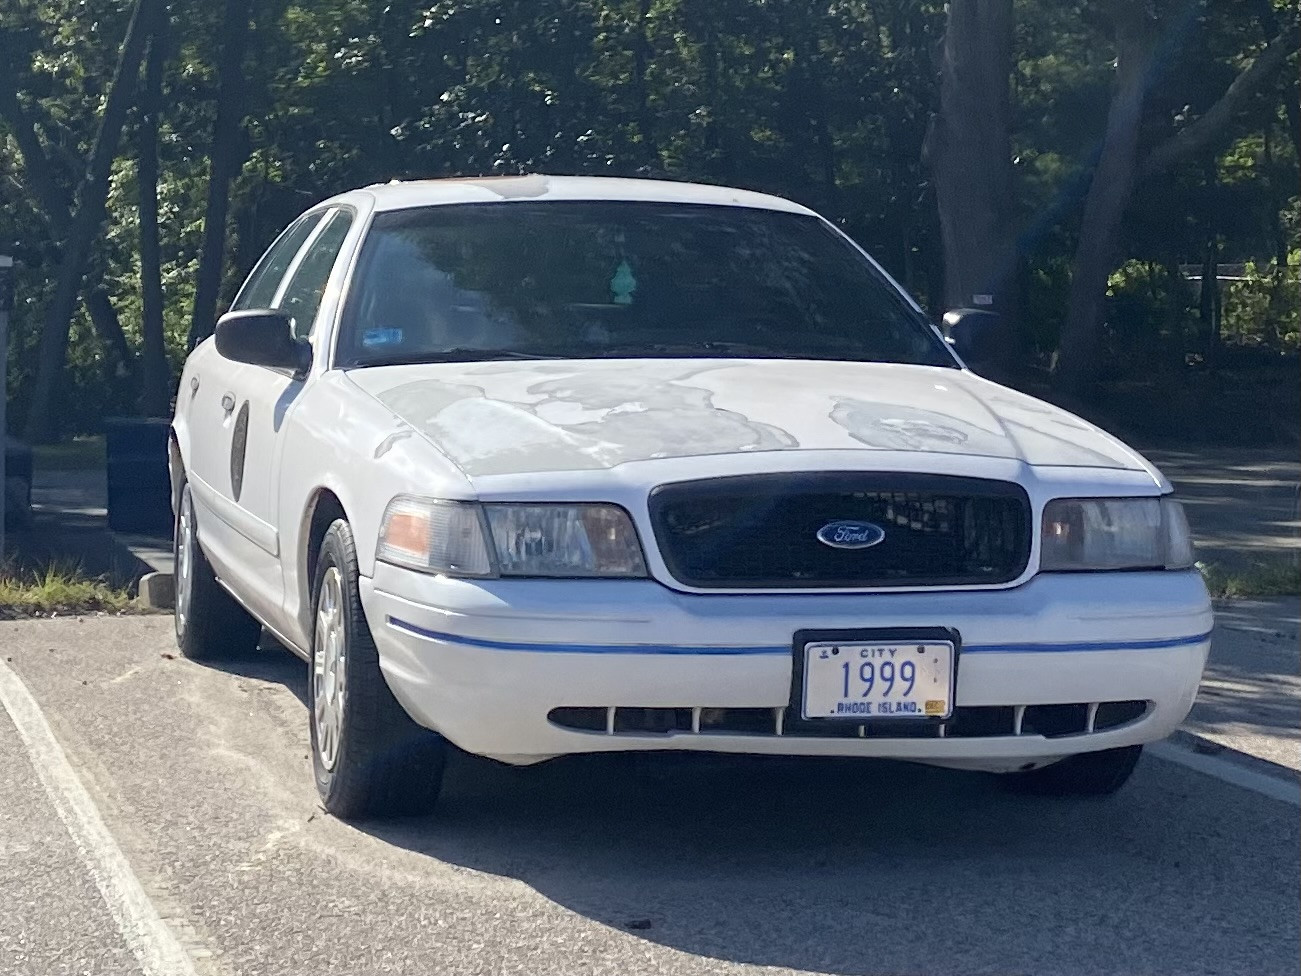 A photo  of Warwick Public Works
            Car 1999, a 2003-2005 Ford Crown Victoria Police Interceptor             taken by @riemergencyvehicles